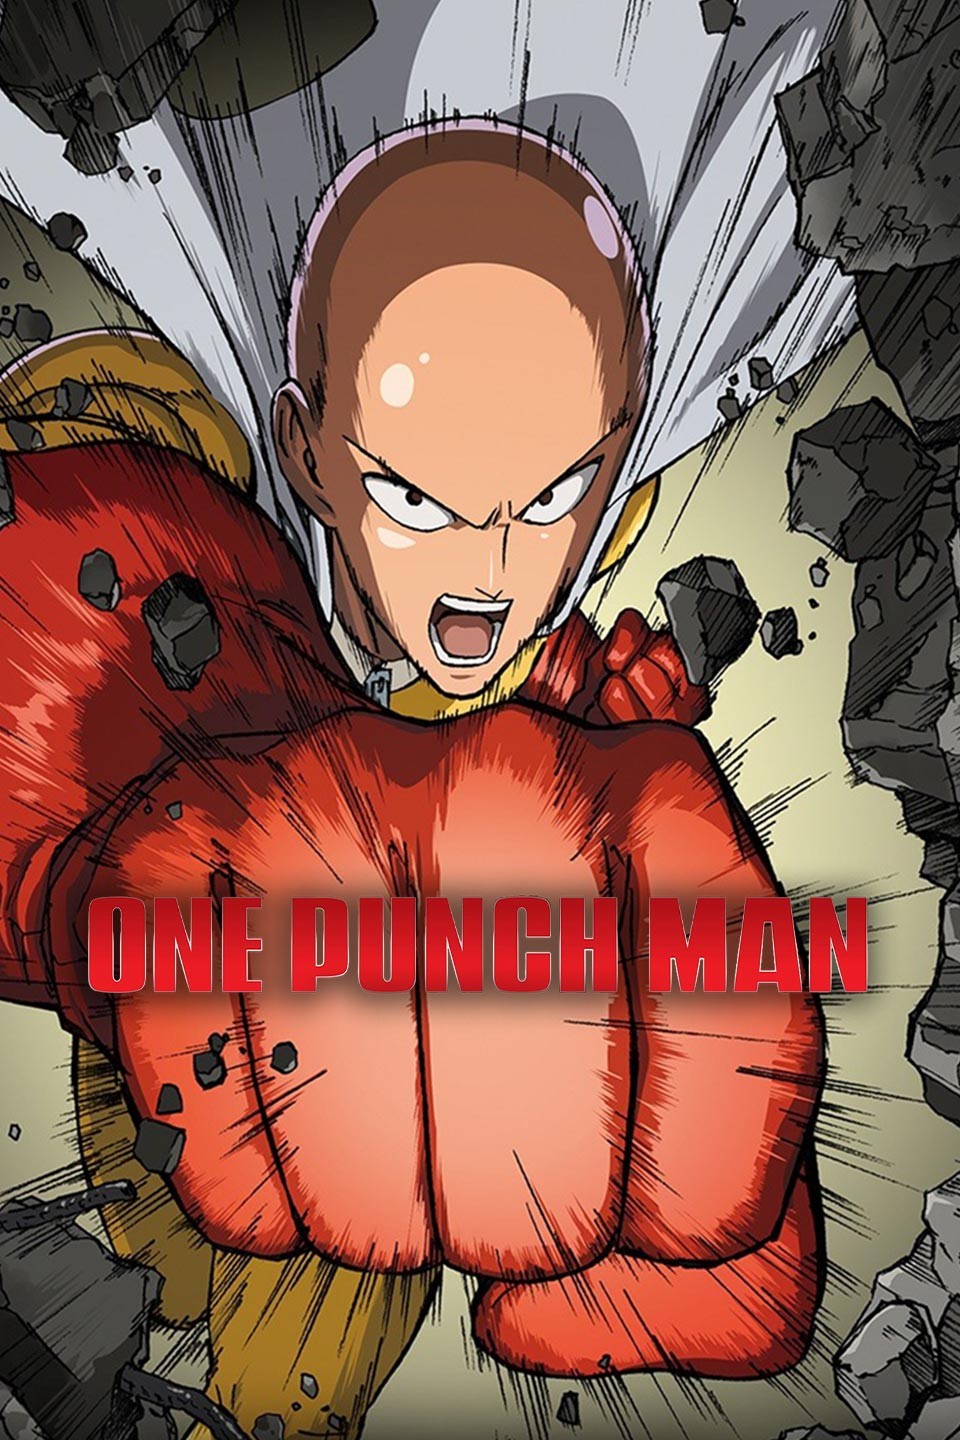 DVD Anime One-Punch Man Complete Set(Season 1+2) Road To Hero +